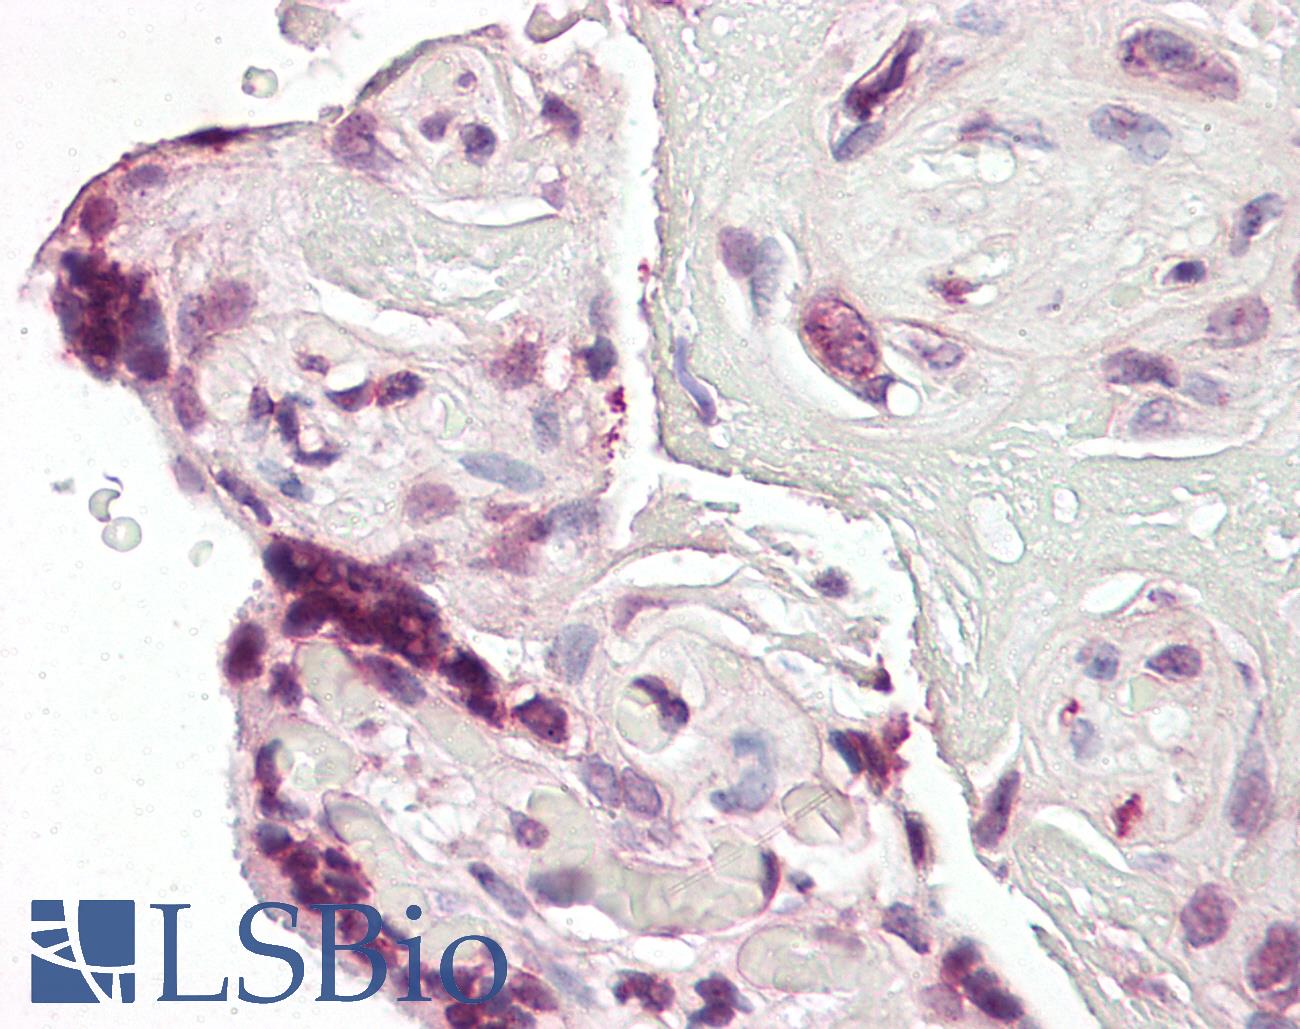 EP300 / p300 Antibody - Anti-EP300 / p300 antibody IHC of human placenta. Immunohistochemistry of formalin-fixed, paraffin-embedded tissue after heat-induced antigen retrieval. Antibody dilution 1:50.